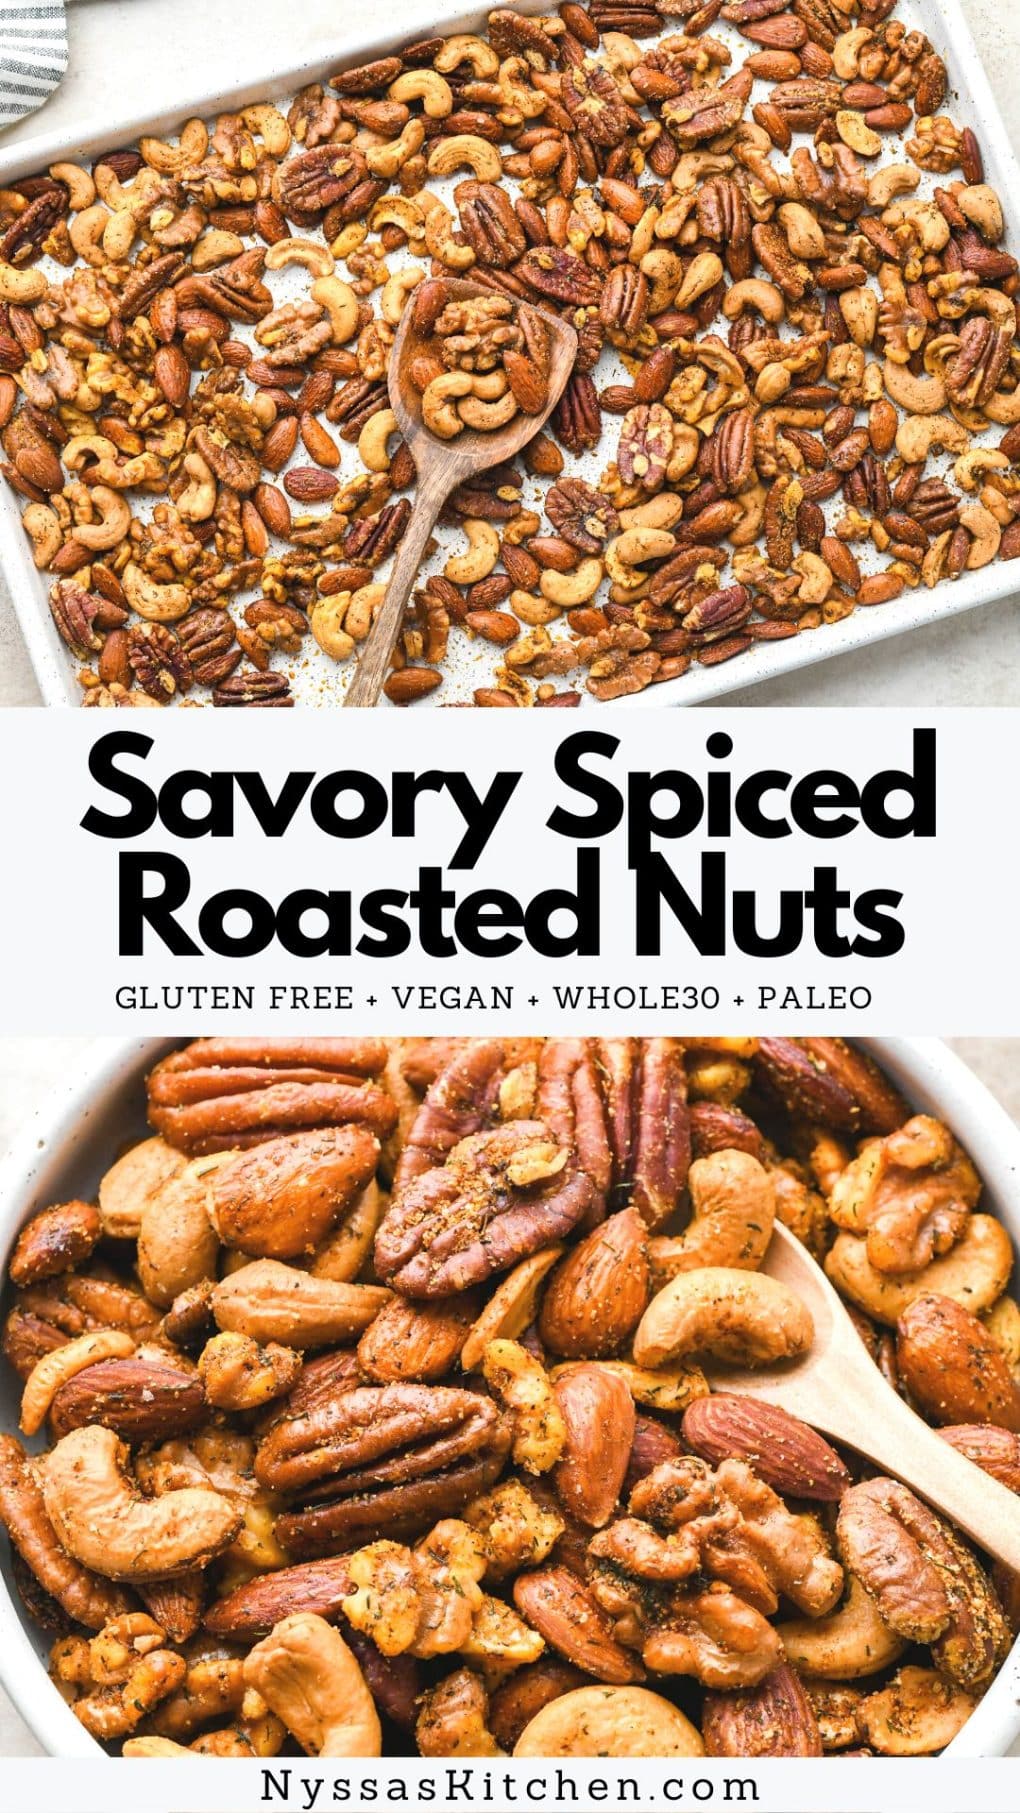 Pinterest Pin for Spiced Roasted Nuts